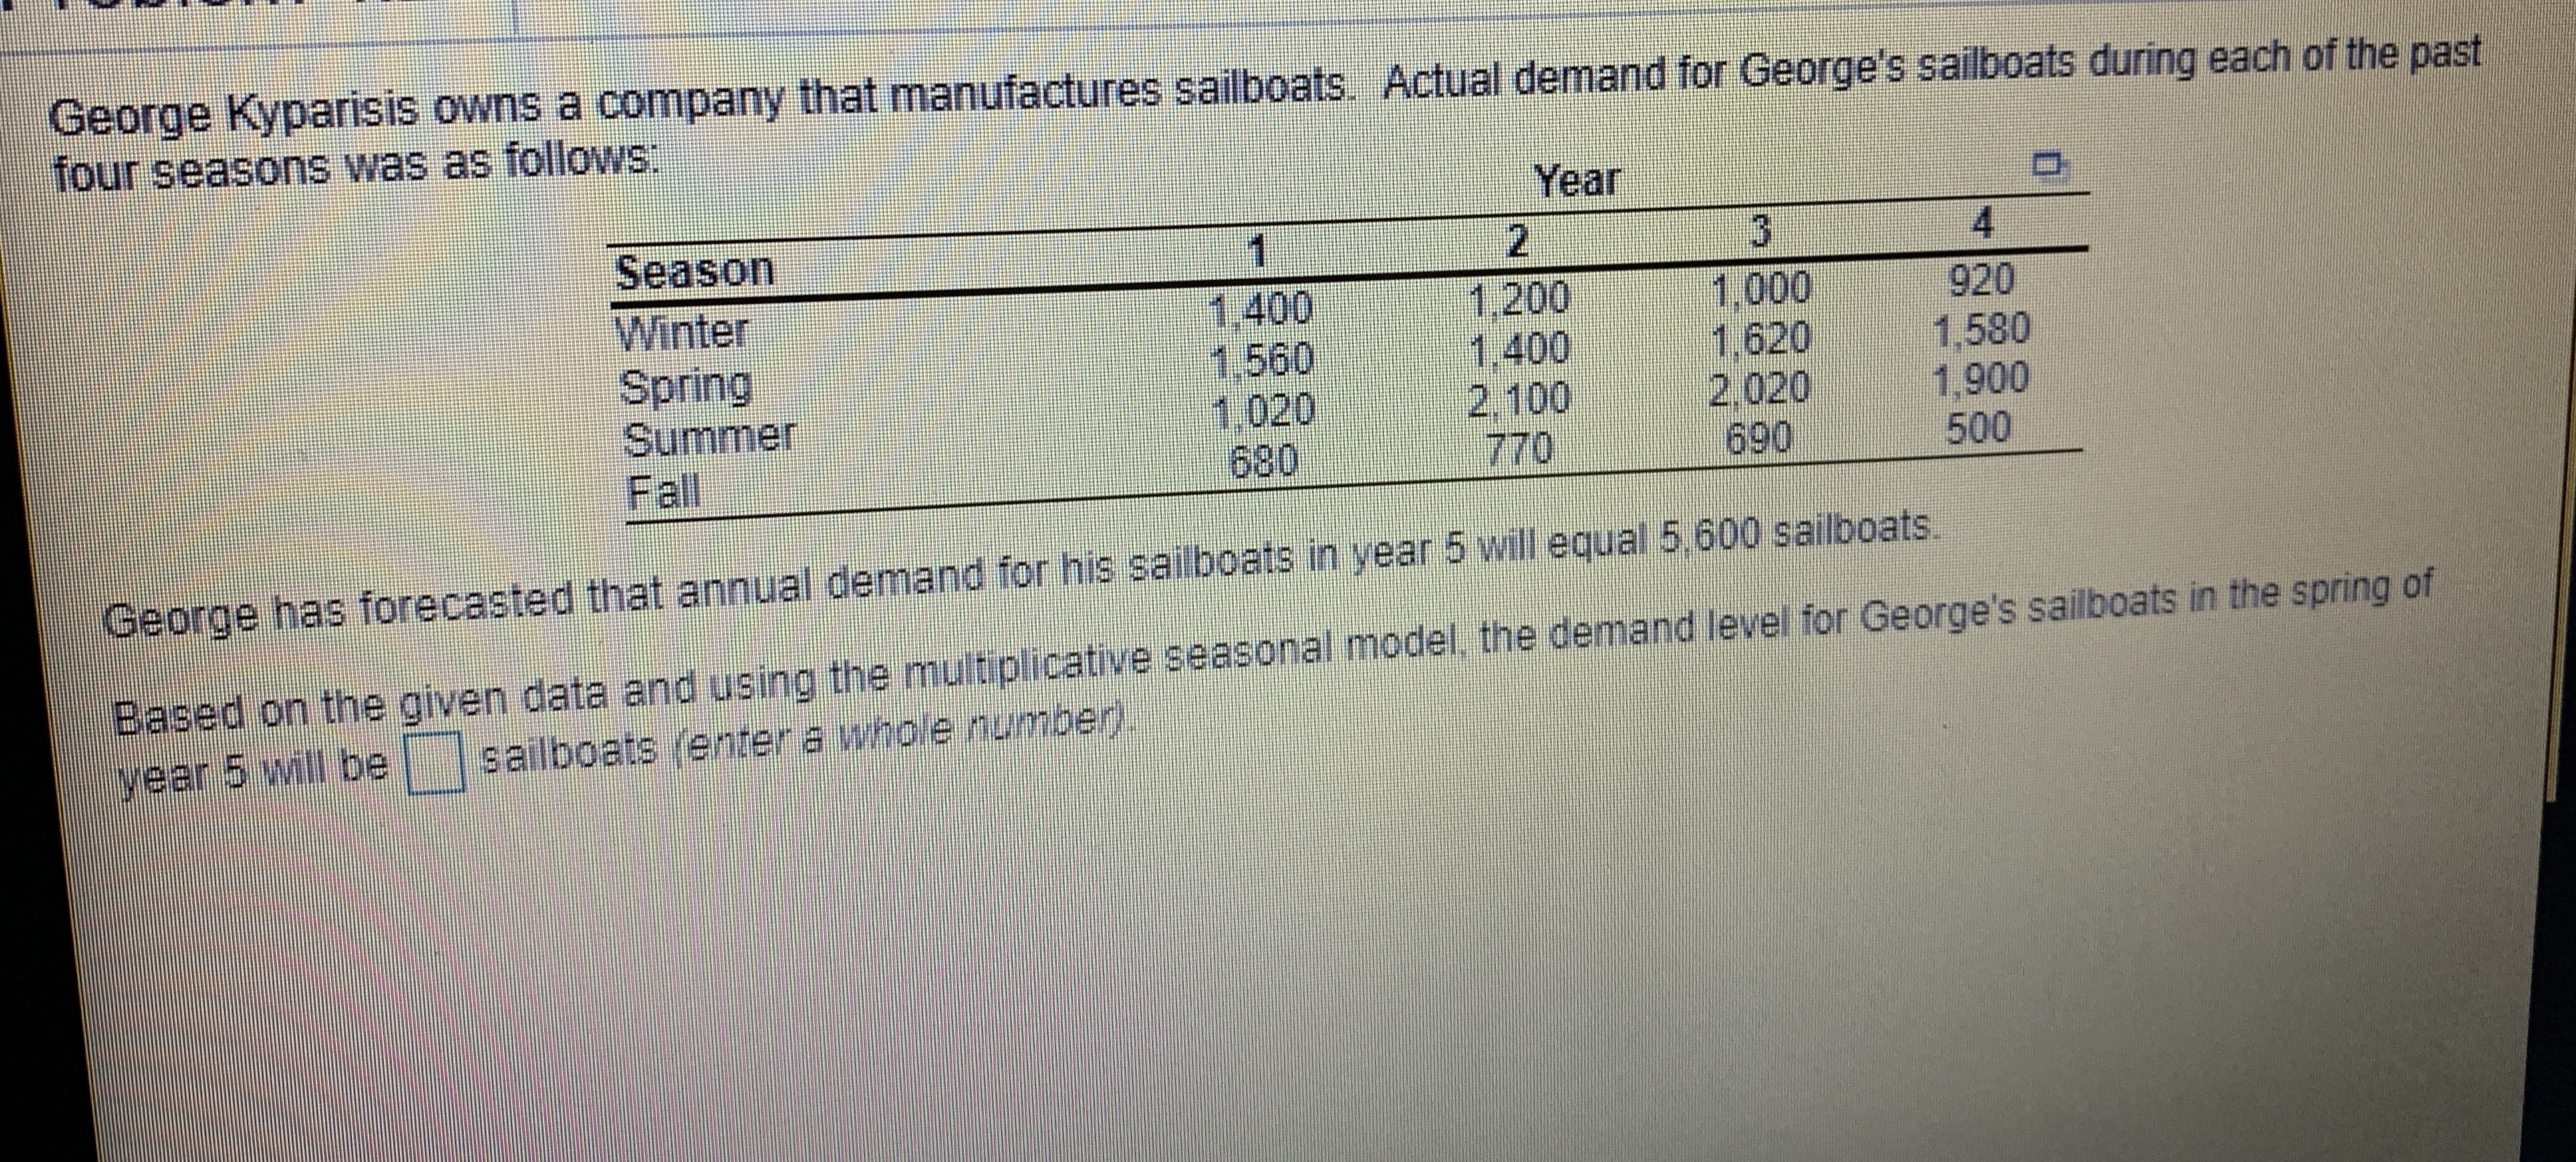 George Kyparisis owns a company that manufactures sailboats. Actual demand for George's sailboats during each of the past
four seasons was as follows:
Year
Season
Winter
Spring
Summer
Fall
1,000
1,400
1.560
1,020
680
1,200
1.400
920
1,6201,580
2.1002,020 1,900
770690500
George has forecasted that annual demand for his sailboats in year 5 will equal 5,600 sailboats.
Based on the given data and using the multiplicative seasonal model, the demand level for George's saliboats in the spring of
year 5 will besailboats (enter a whole number)
